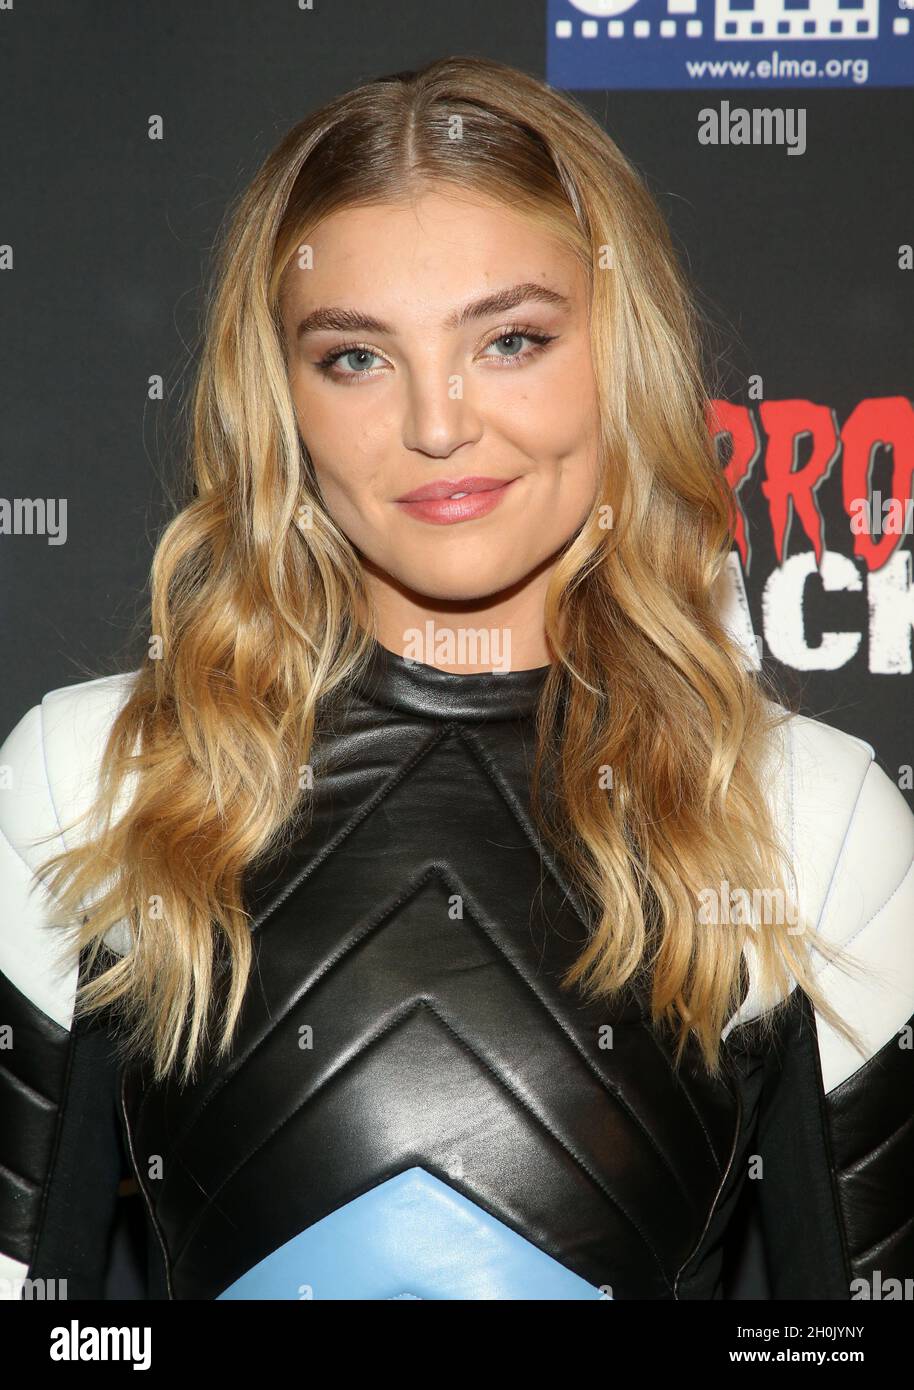 Hollywood, Ca. 12th Oct, 2021. Rachel Hilbert, at the 21st Screamfest Opening Night Screening Of The Retaliators at Mann Chinese 6 Theatre in Hollywood, California on October 12, 2021. Credit: Faye Sadou/Media Punch/Alamy Live News Stock Photo